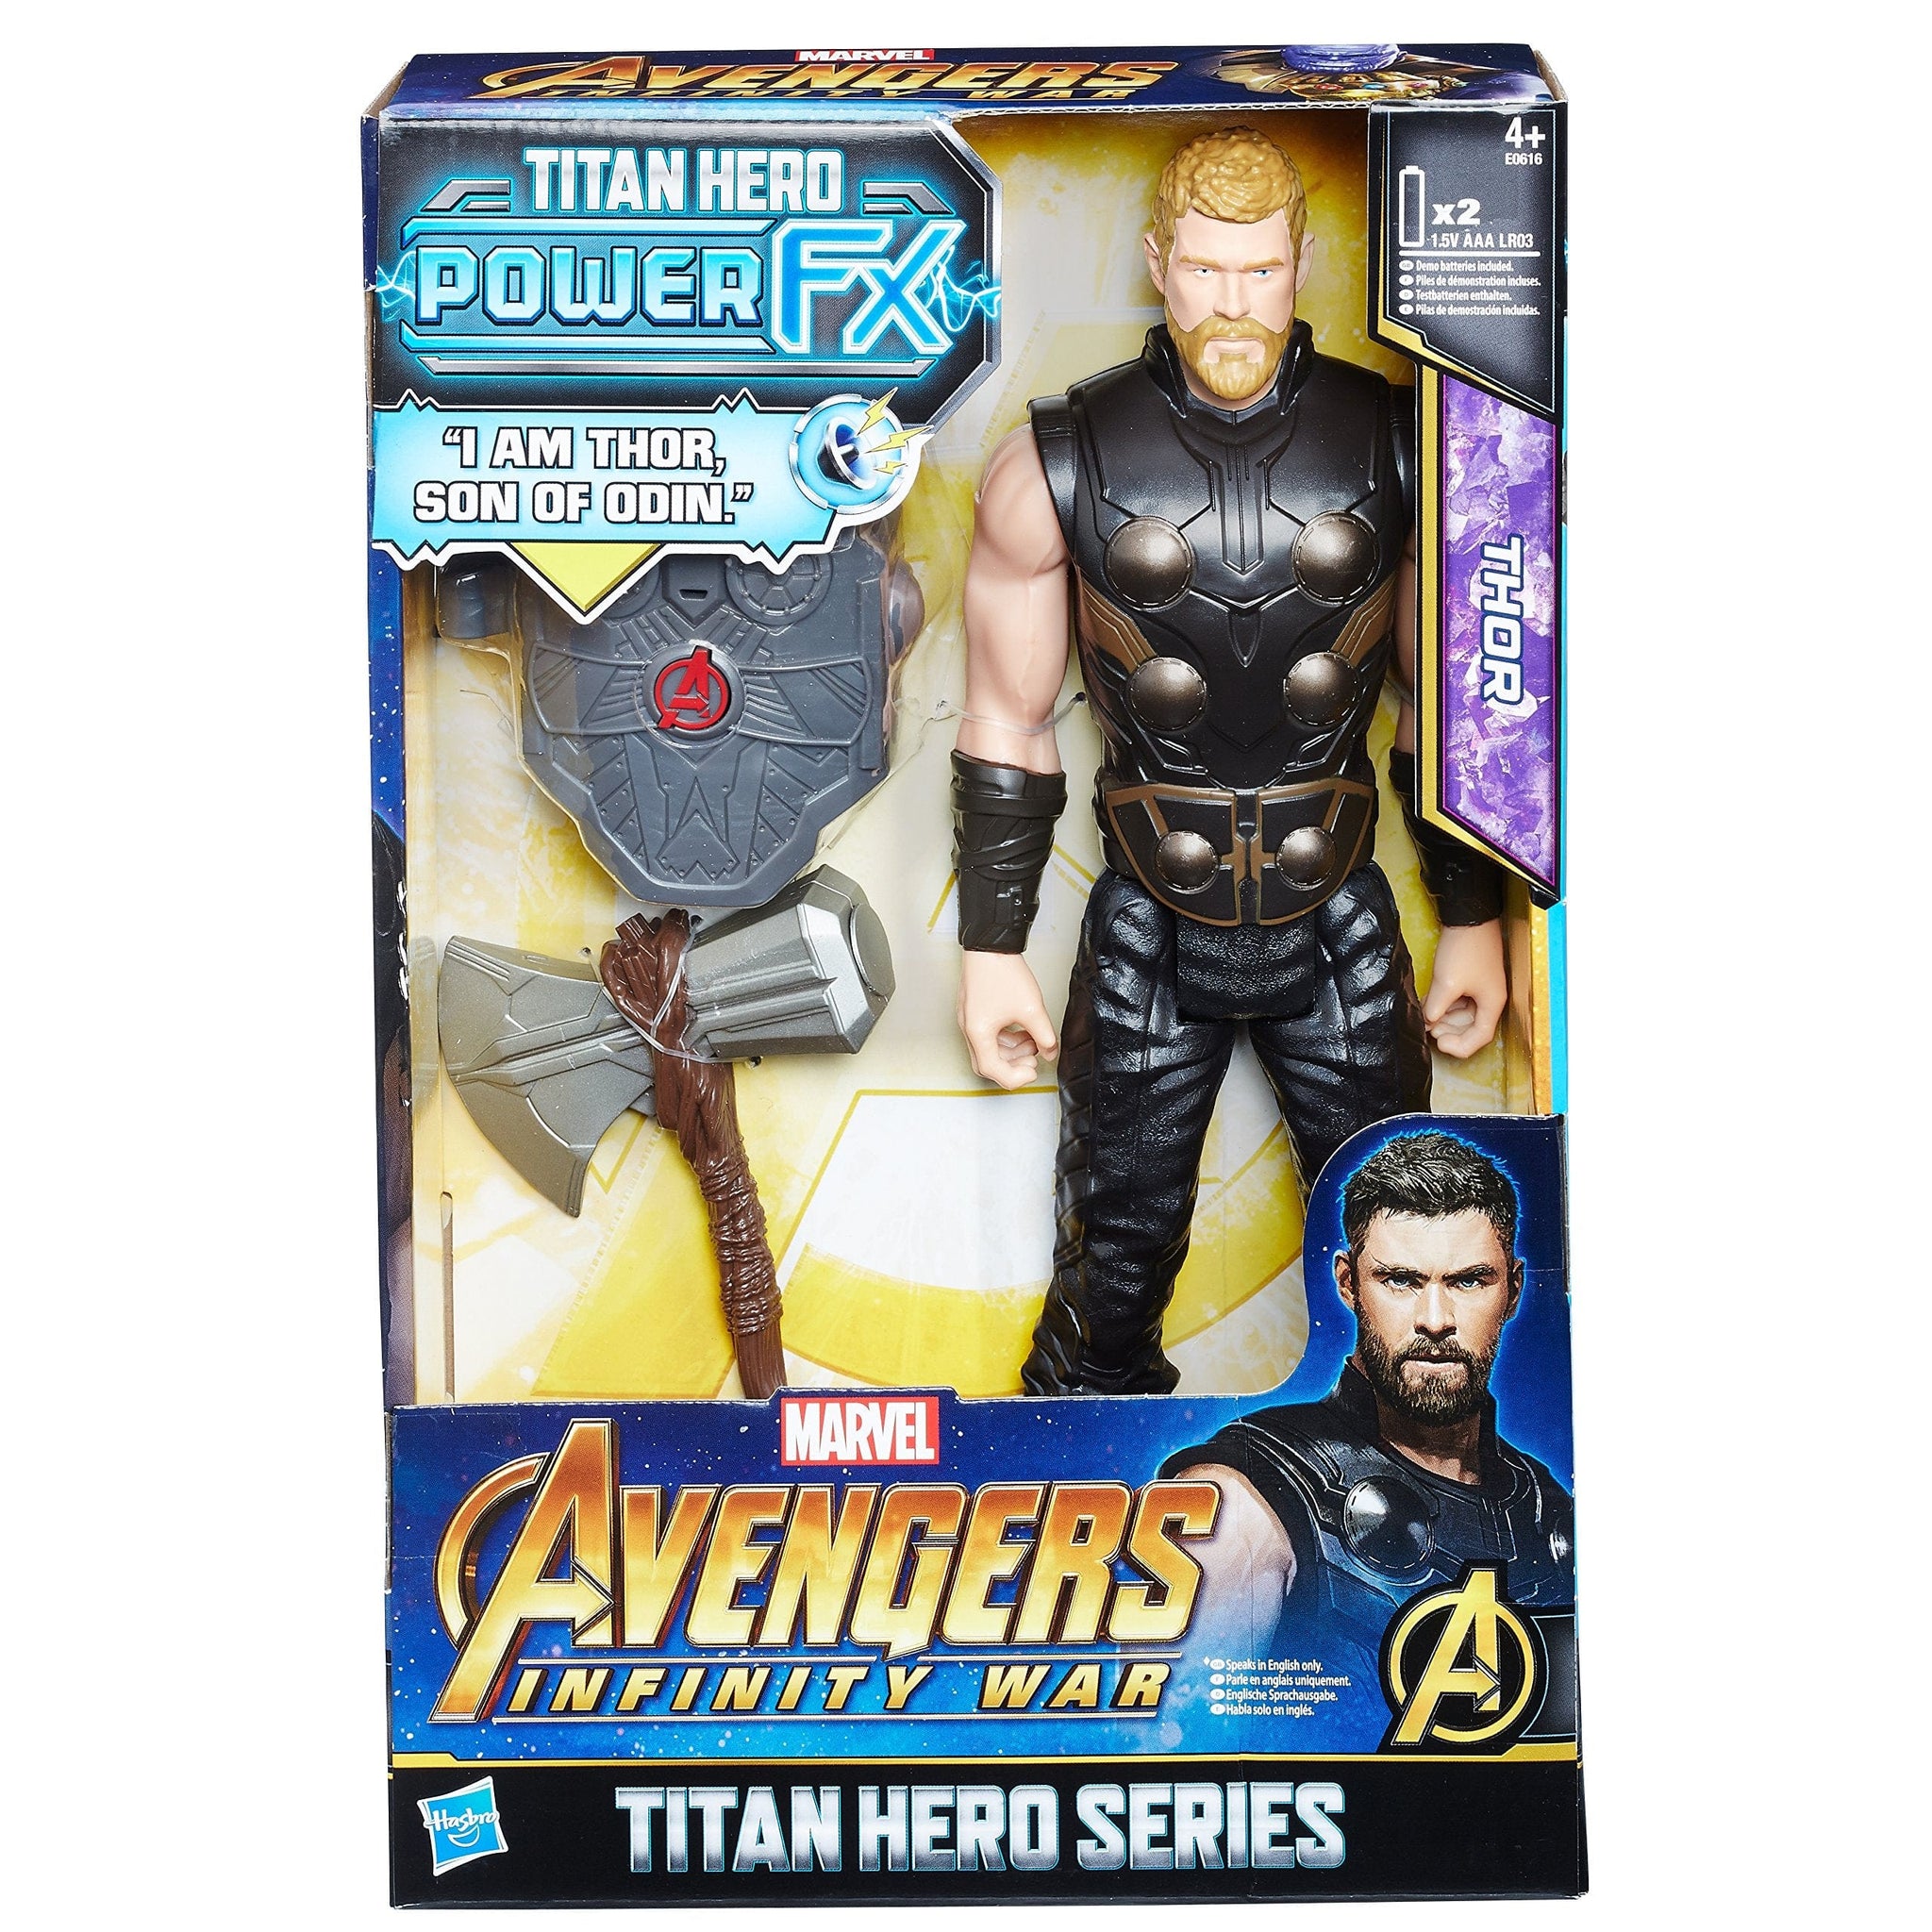 Hasbro Avengers Infinity War Titan Heroes Assorted: Inspired by the Avengers: Infinity War movie. This figure includes a Titan Hero Power FX pack so when kids connect the pack - E0616